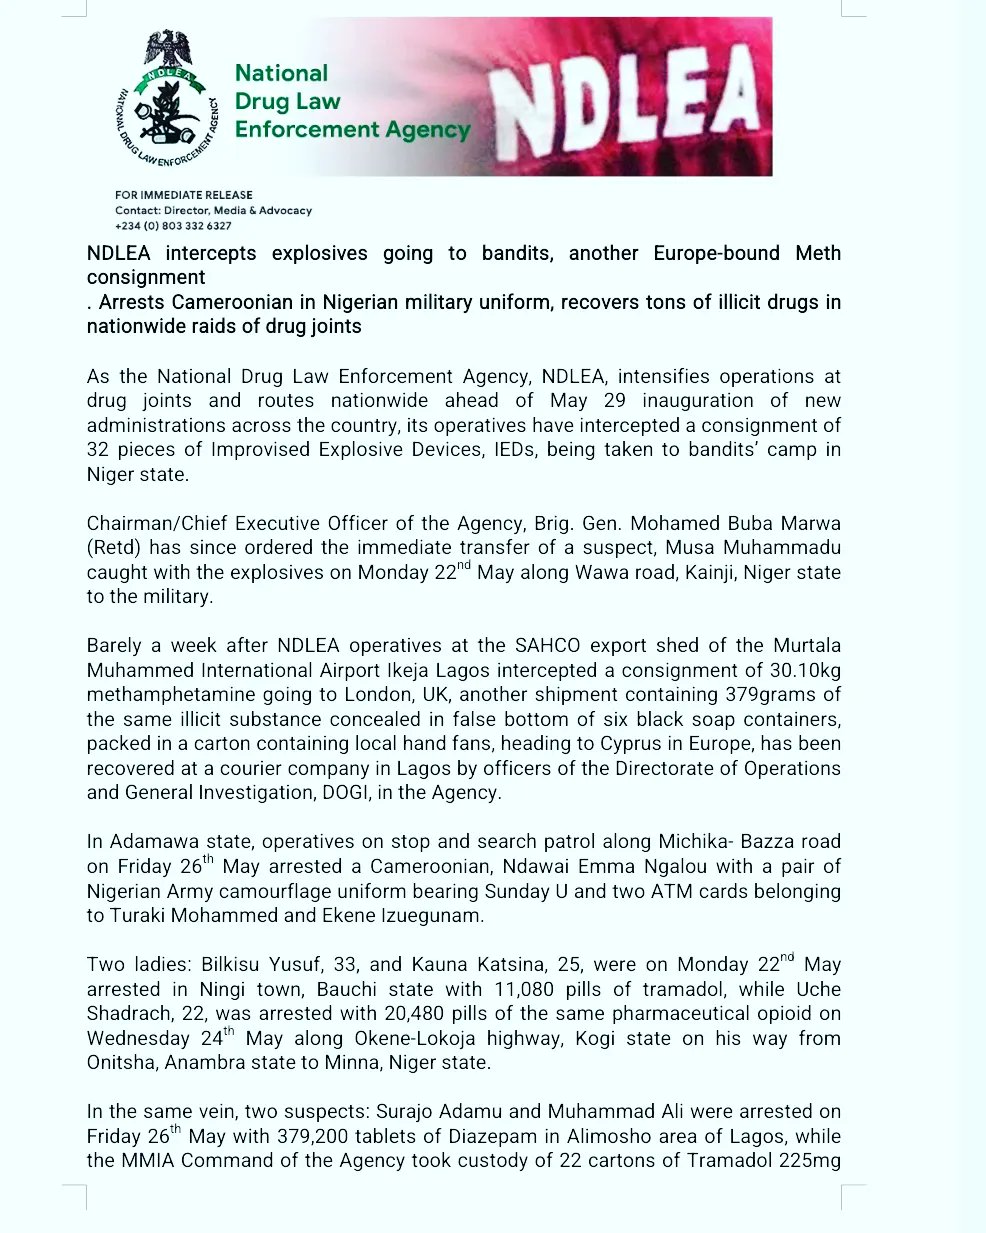 NDLEA: NDLEA intercepts explosives going to bandits, another Europe-bound Meth consignment